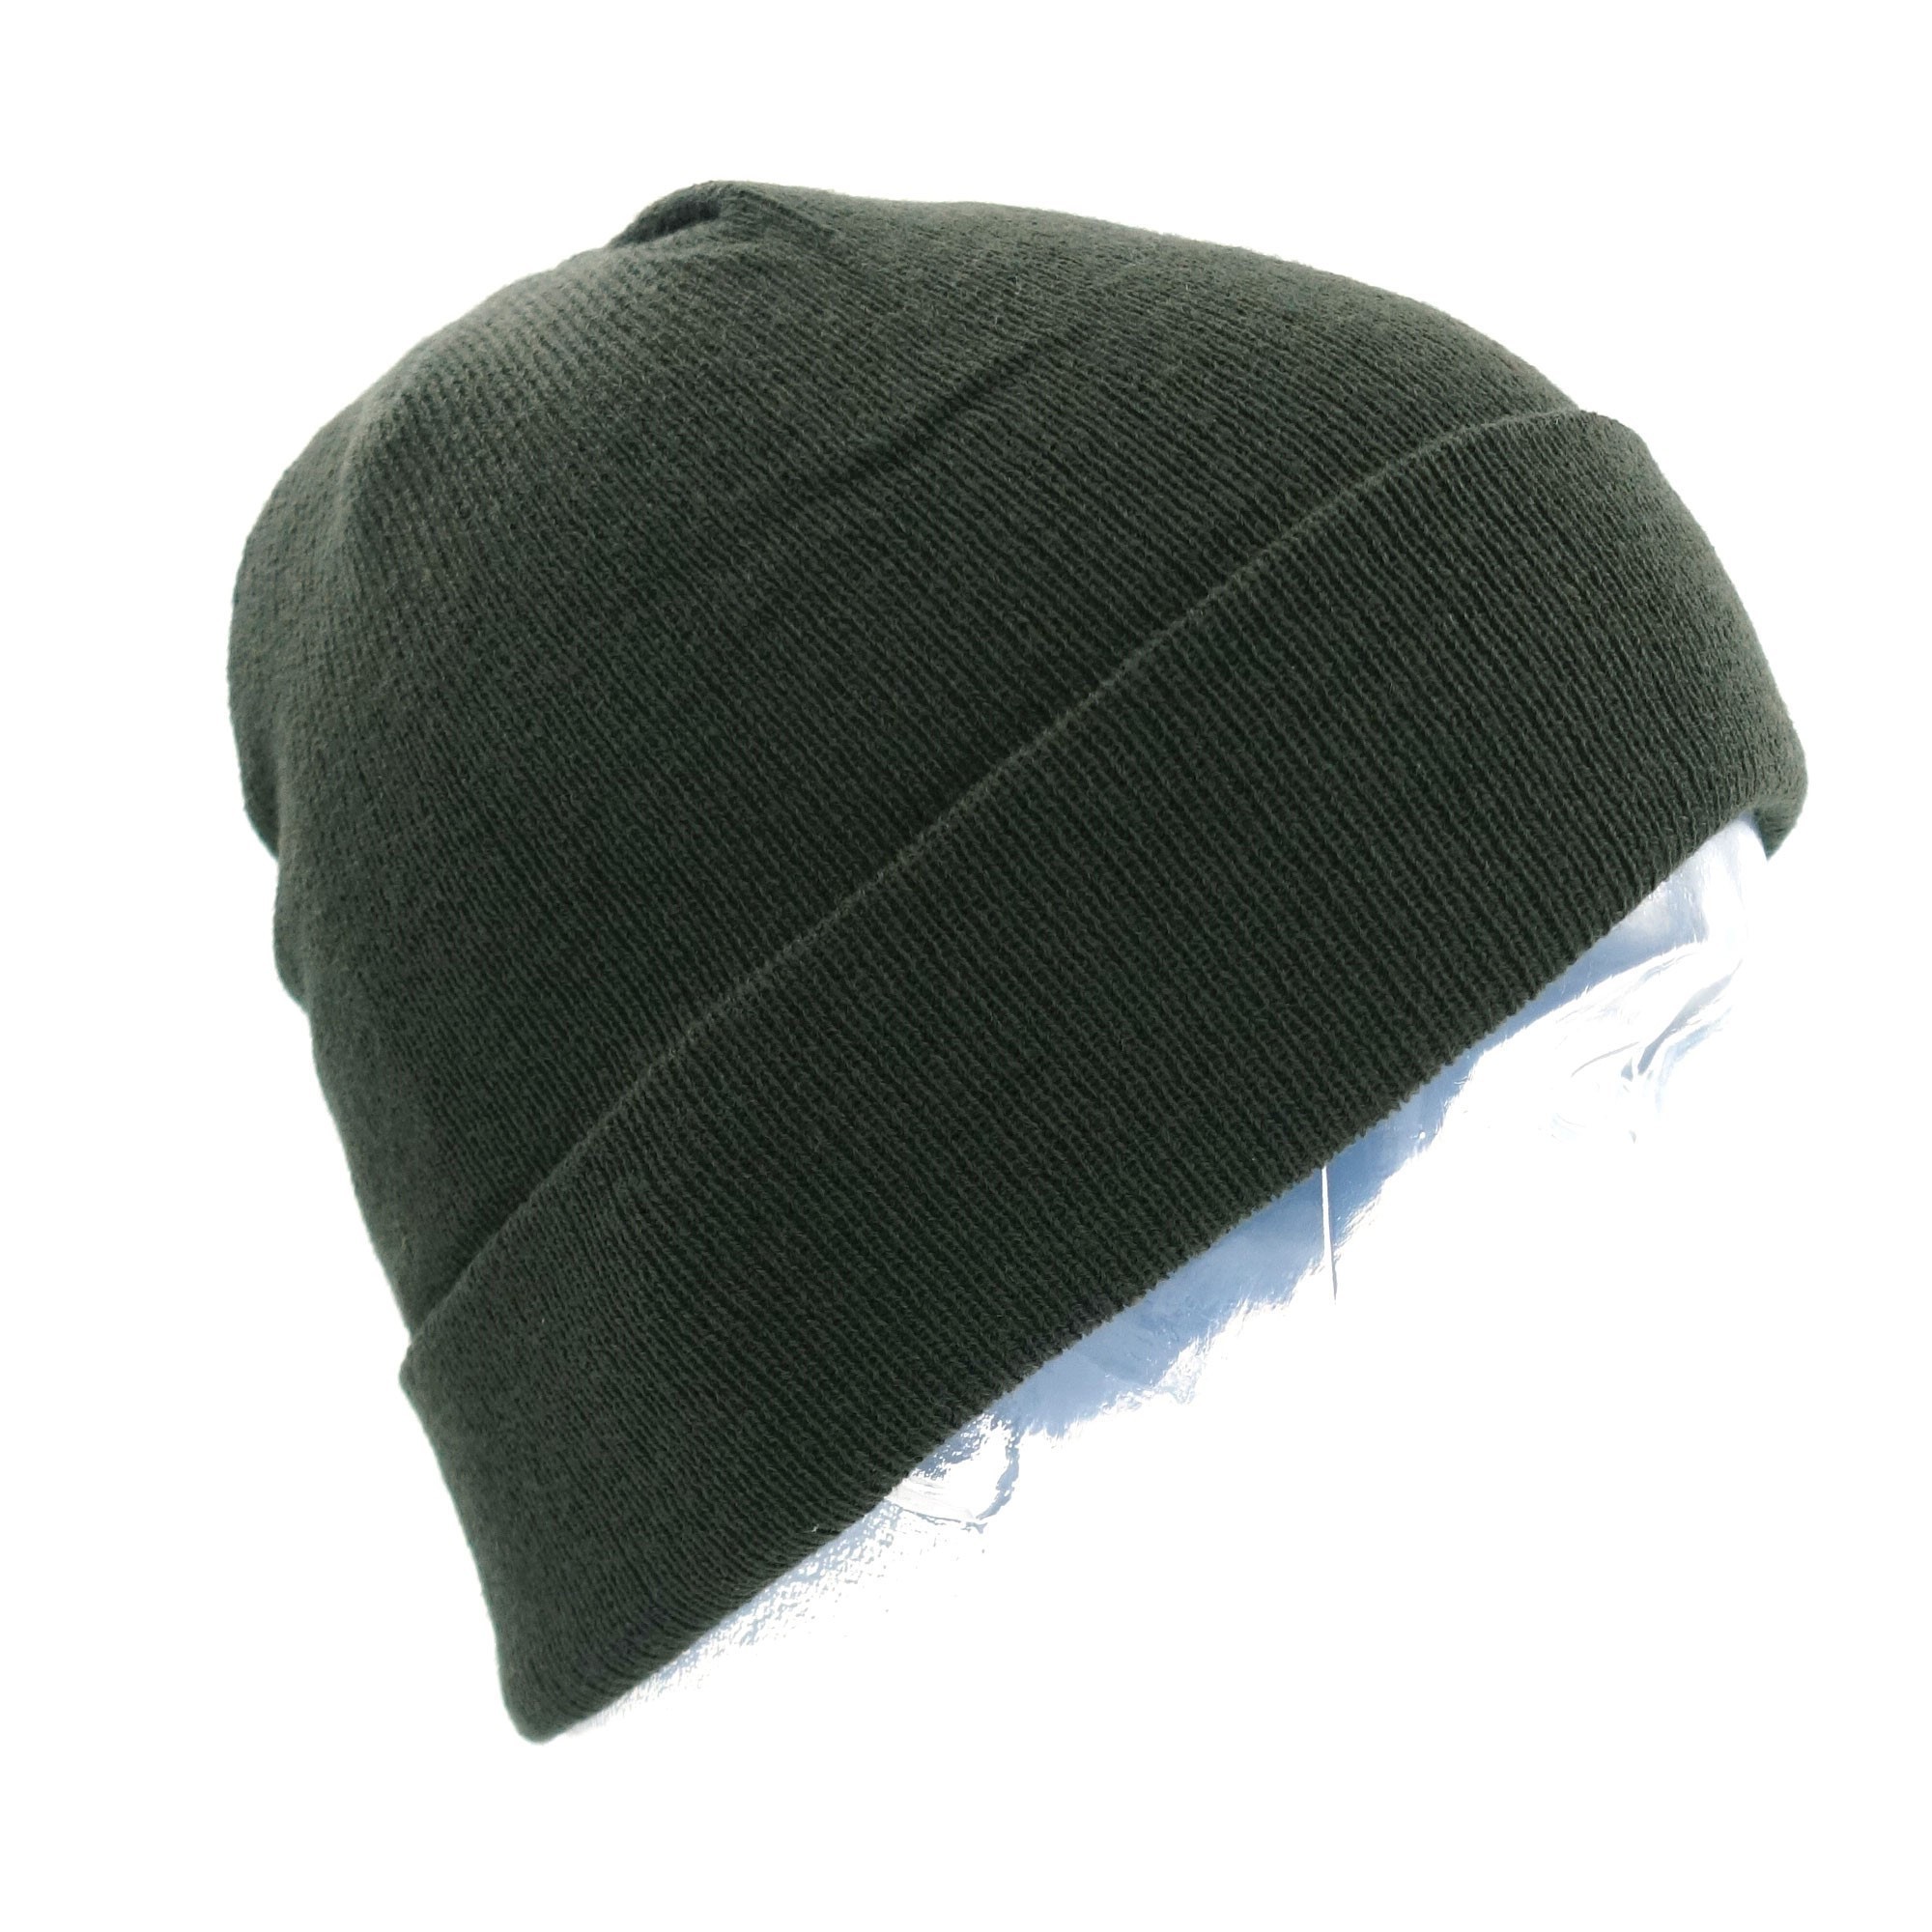 Bonnet Militaire Maille Thinsulate®